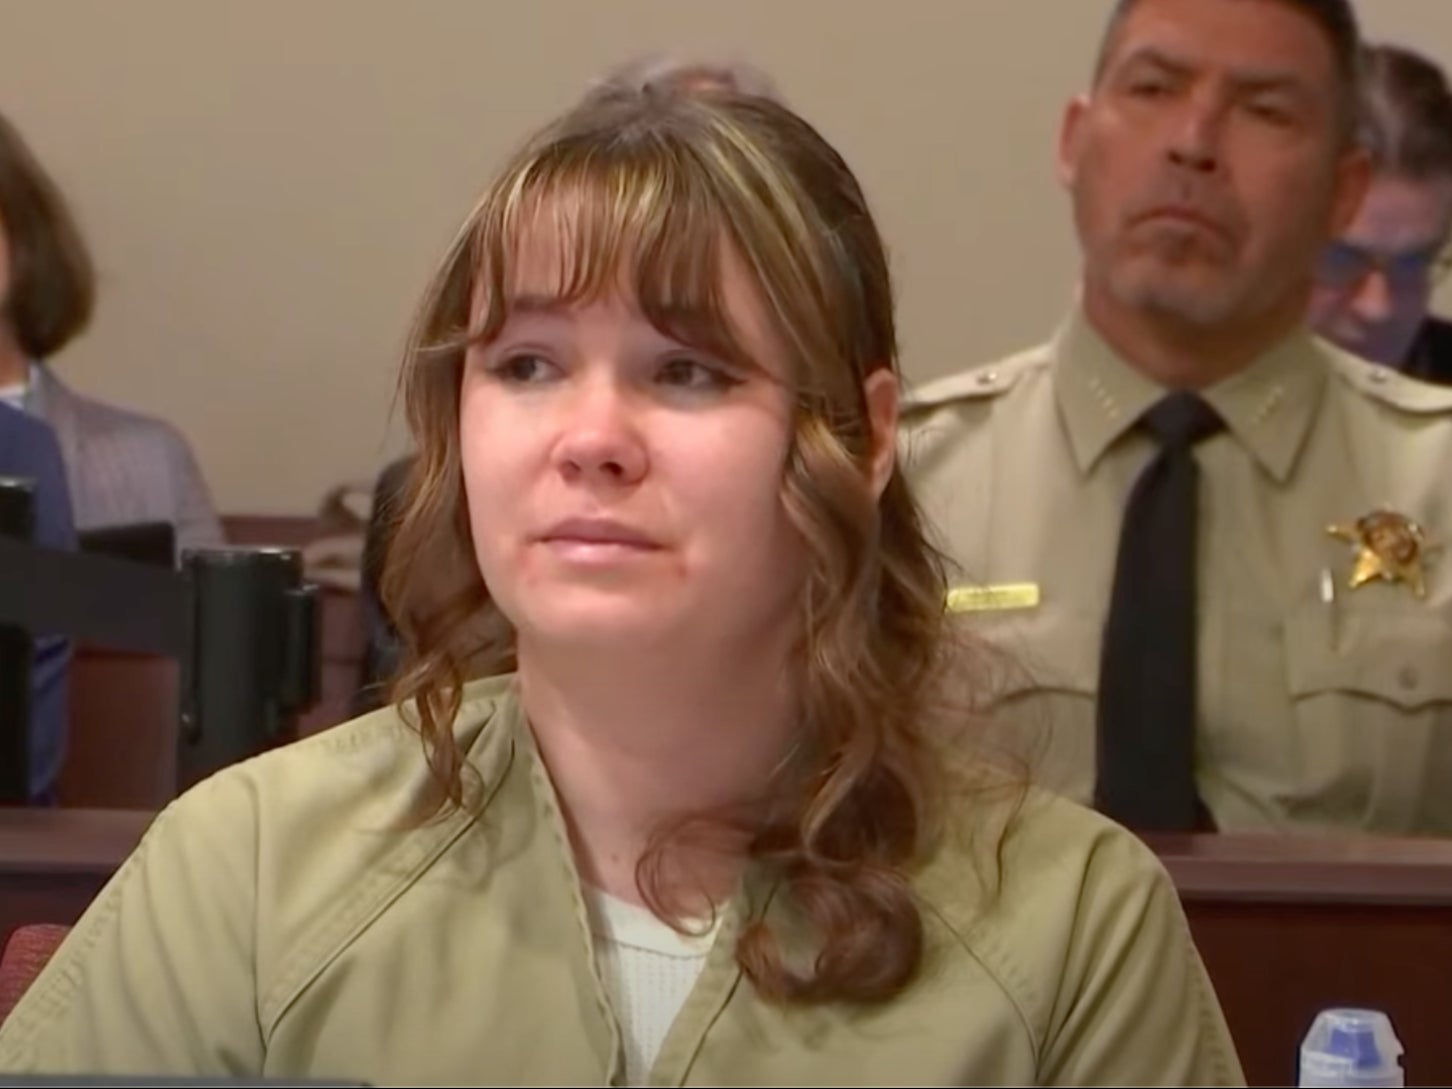 Rust armourer Hannah Gutierrez-Reed, who was convicted of involuntary manslaughter in the shooting death of cinematographer Halyna Hutchins, during her sentencing hearing in Santa Fe, New Mexico